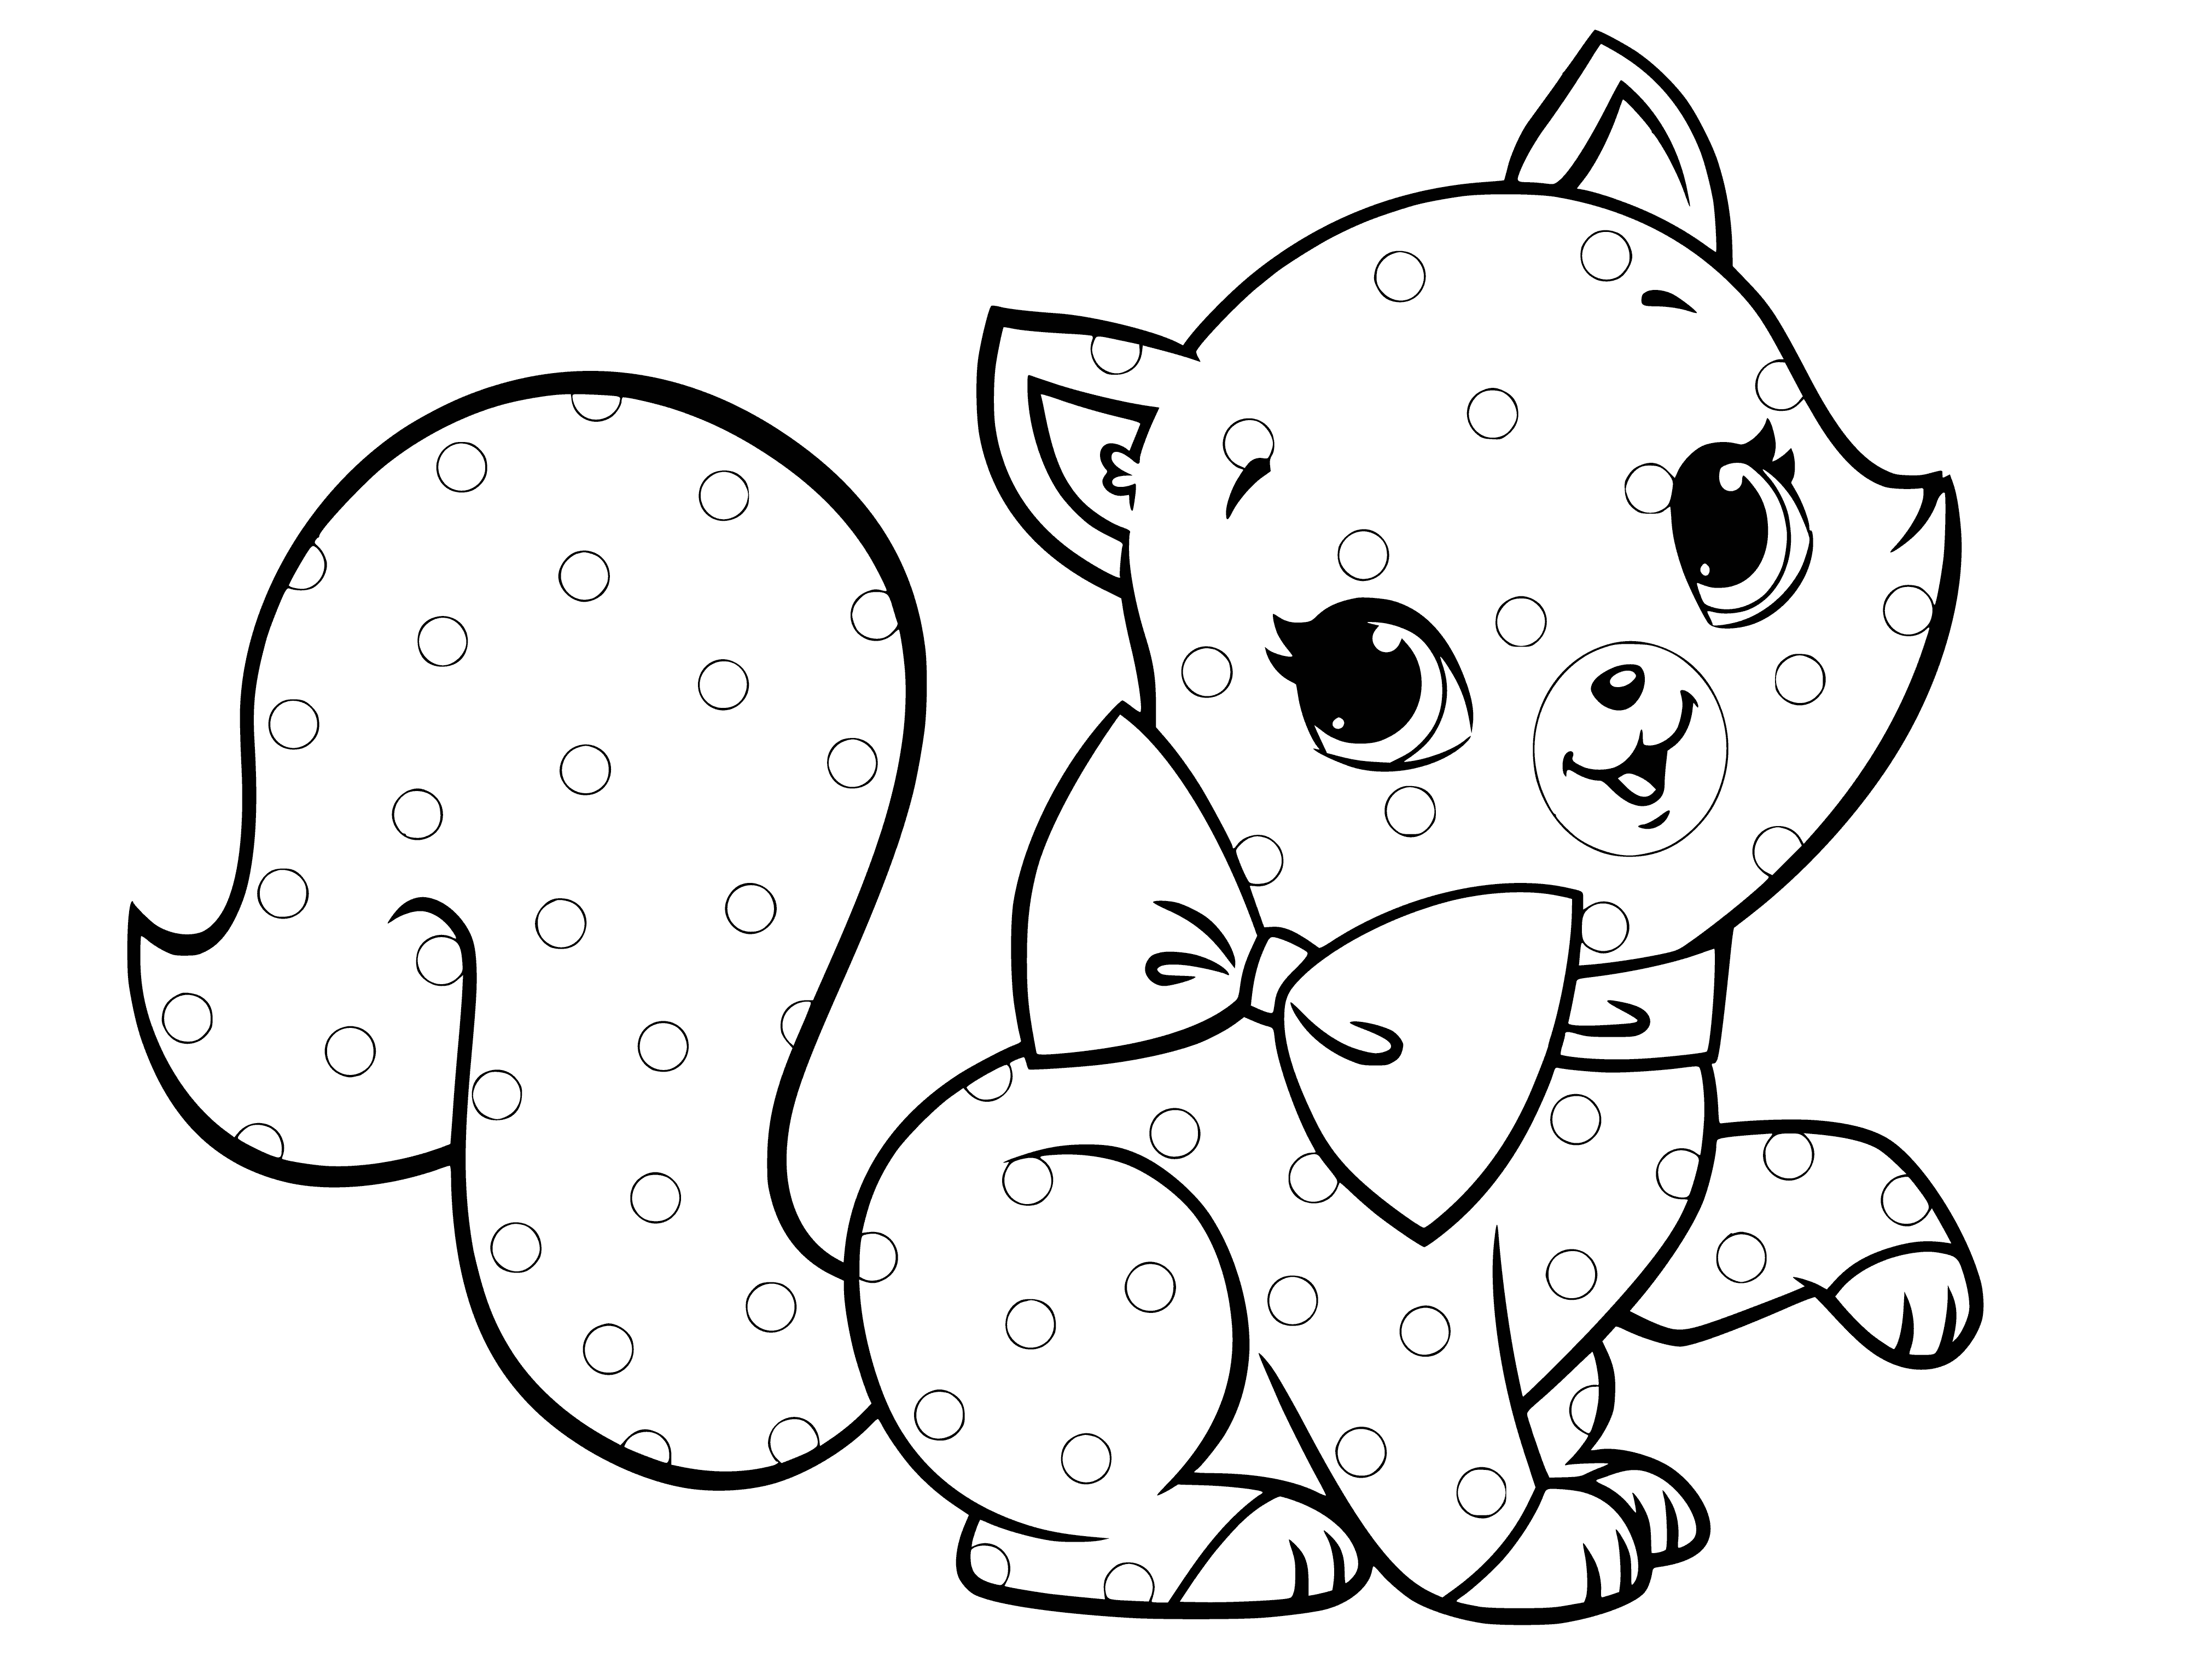 coloring page: Cute yellow kitten with blue eyes and pink bow, sitting on its hind legs with outstretched paws. #coloringpage